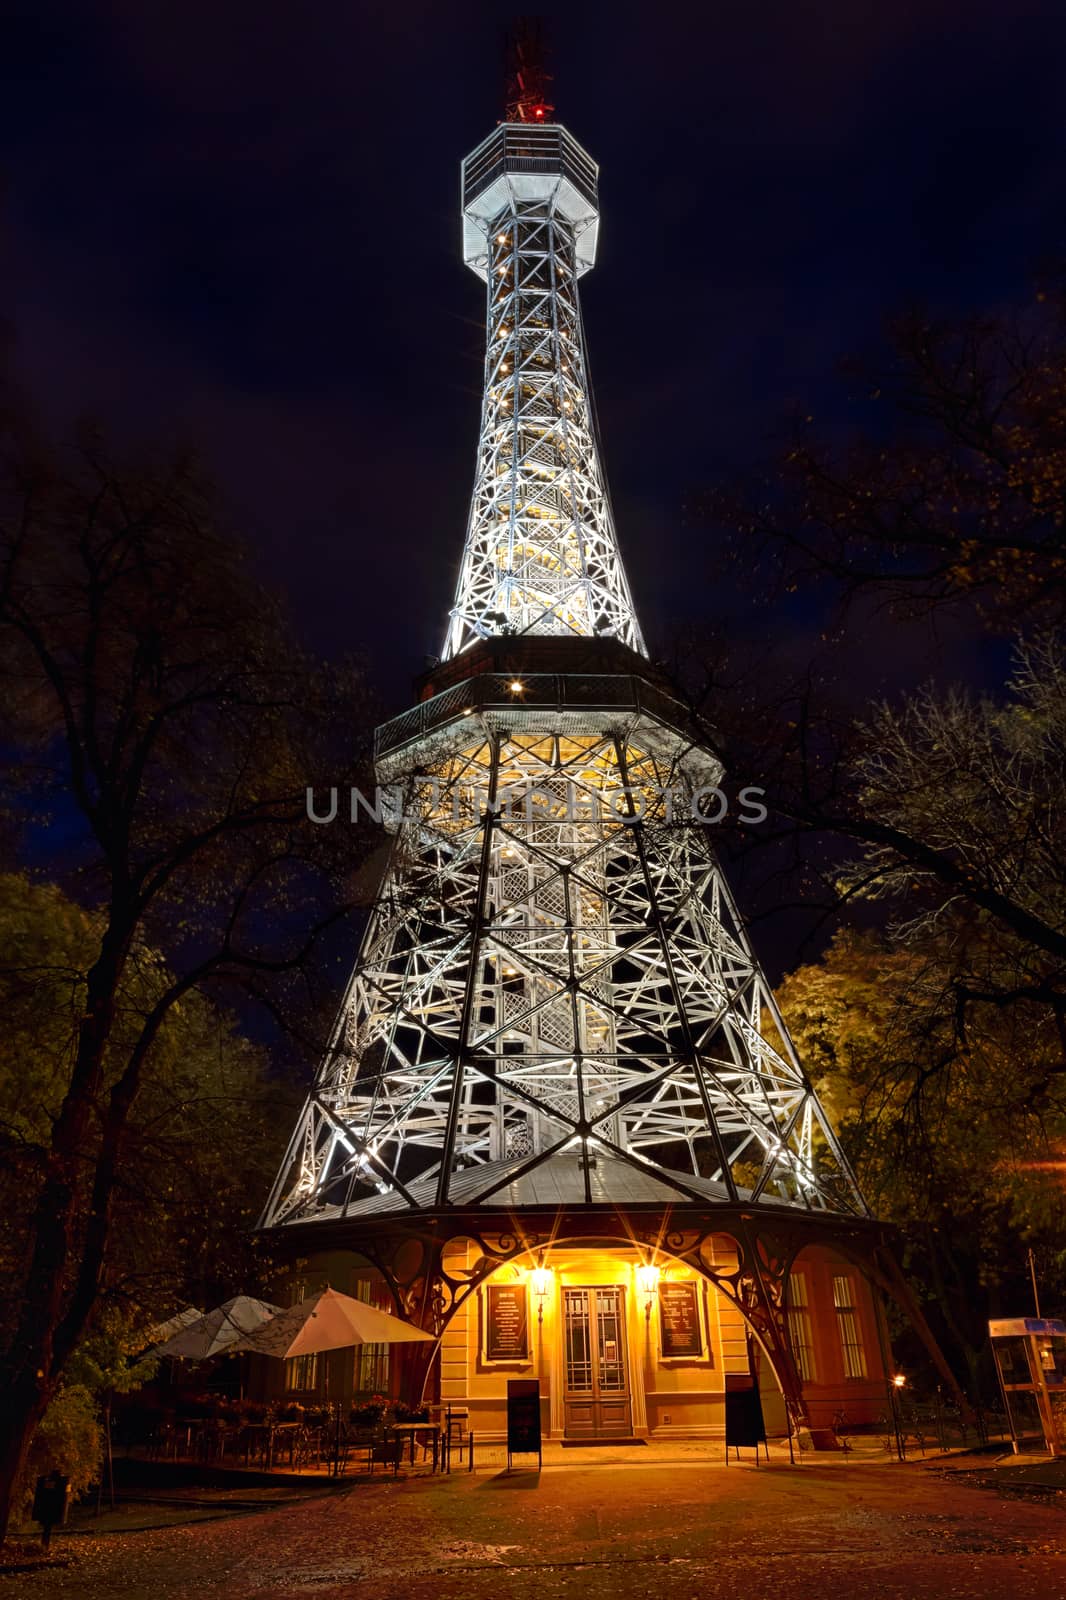 Prague Lookout Tower on Petrin hill with the night illumination